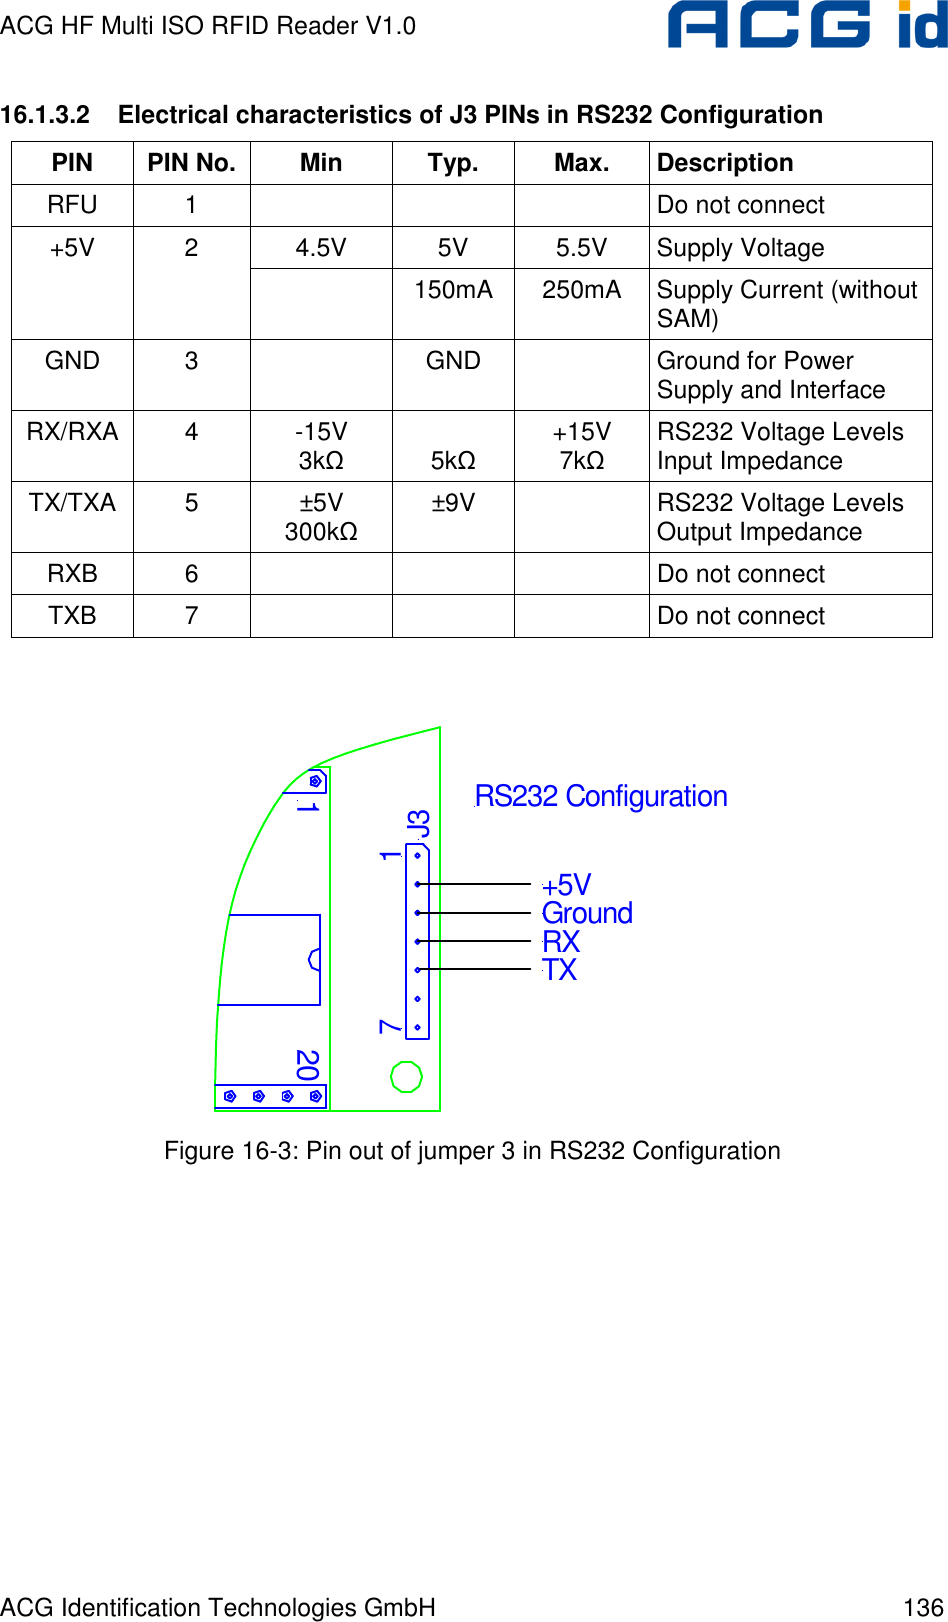 ACG HF Multi ISO RFID Reader V1.0 ACG Identification Technologies GmbH  136 16.1.3.2  Electrical characteristics of J3 PINs in RS232 Configuration PIN  PIN No.  Min  Typ.  Max.  Description RFU  1        Do not connect 4.5V  5V  5.5V  Supply Voltage +5V  2   150mA  250mA  Supply Current (without SAM) GND  3    GND    Ground for Power Supply and Interface RX/RXA 4  -15V 3kΩ  5kΩ +15V 7kΩ RS232 Voltage Levels Input Impedance TX/TXA  5  ±5V 300kΩ ±9V    RS232 Voltage Levels Output Impedance RXB  6        Do not connect TXB  7        Do not connect     12017J3+5VGroundRXTXRS232 Configuration Figure 16-3: Pin out of jumper 3 in RS232 Configuration  